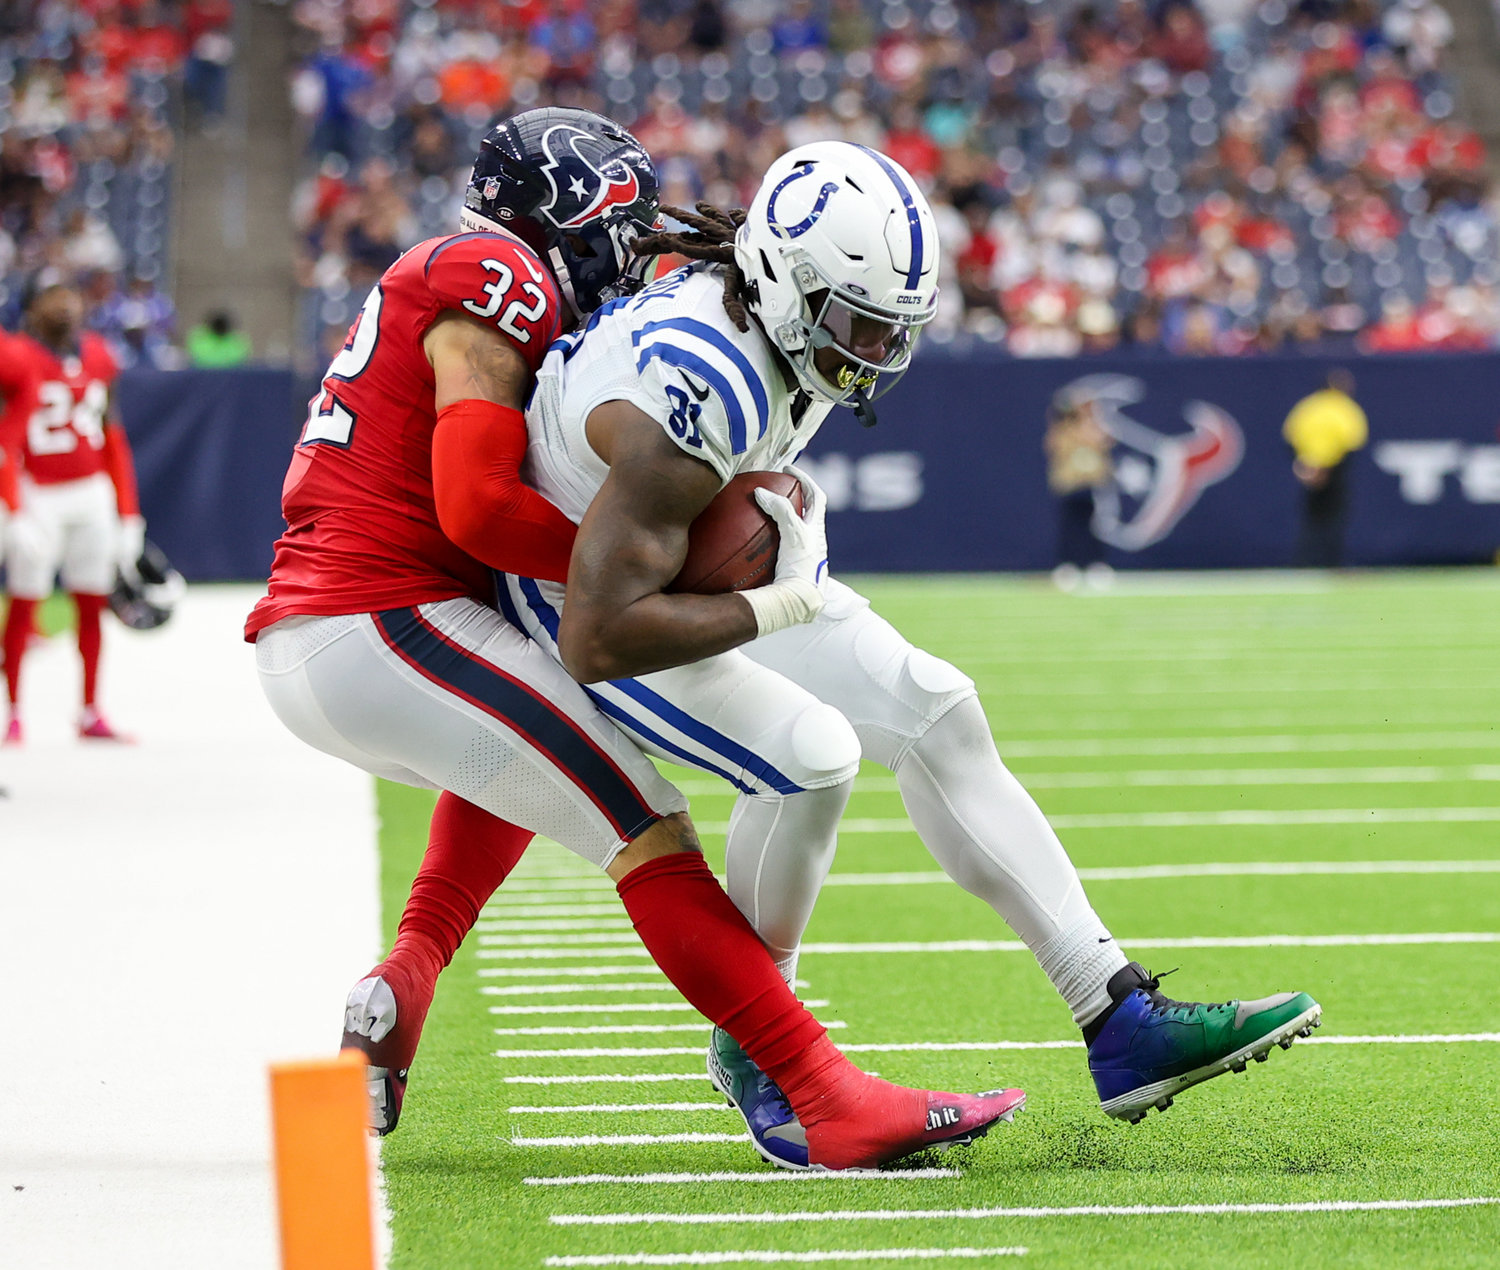 Houston Texans linebacker Garret Wallow (32) tackles Indianapolis Colts tight end Mo Alie-Cox (81) after a catch during an NFL game between the Texans and the Colts on December 5, 2021 in Houston, Texas. The Colts won, 31-0.